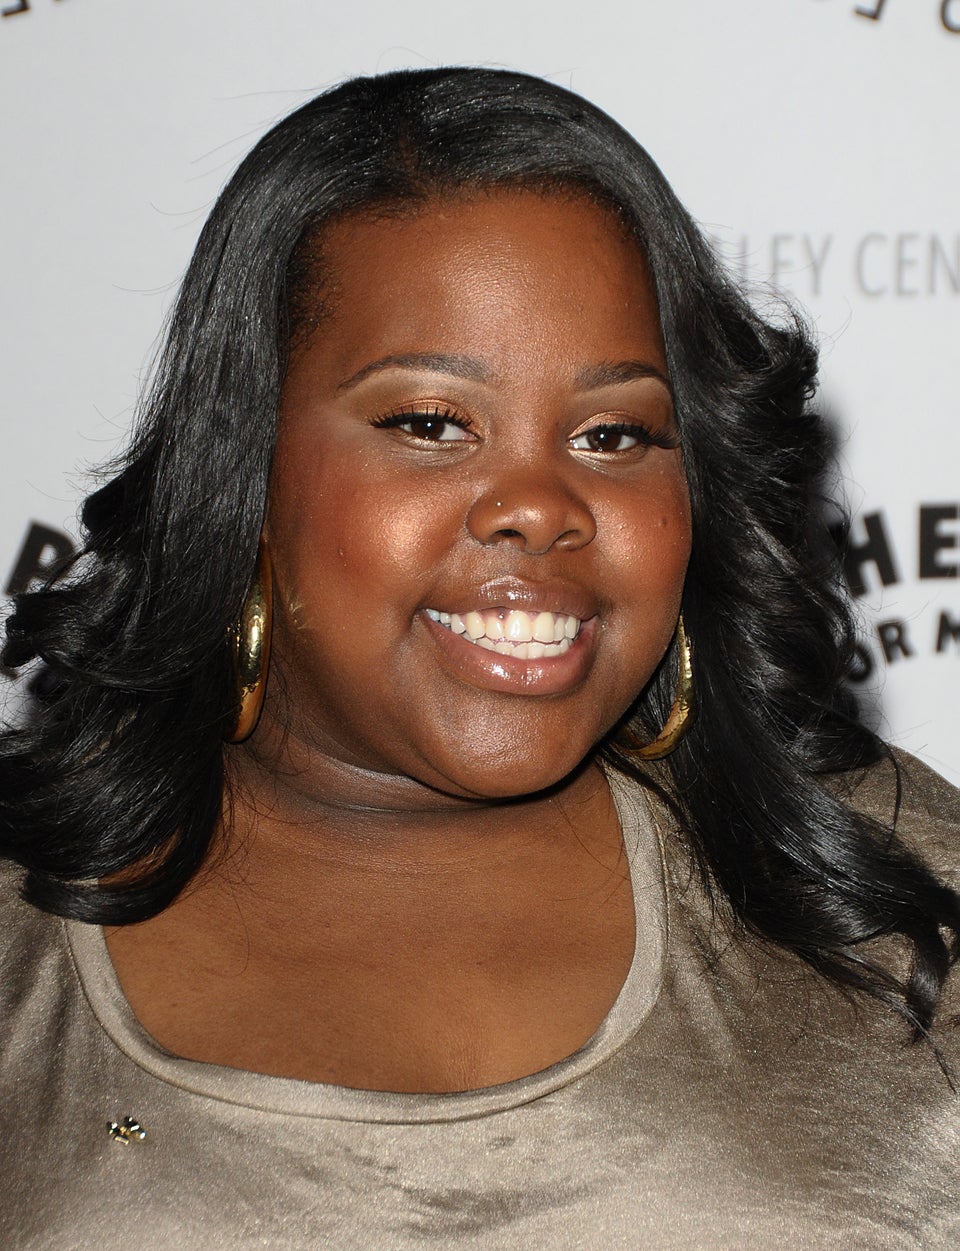 EXCLUSIVE: Amber Riley on Her New York Stage Debut and ‘Glee’